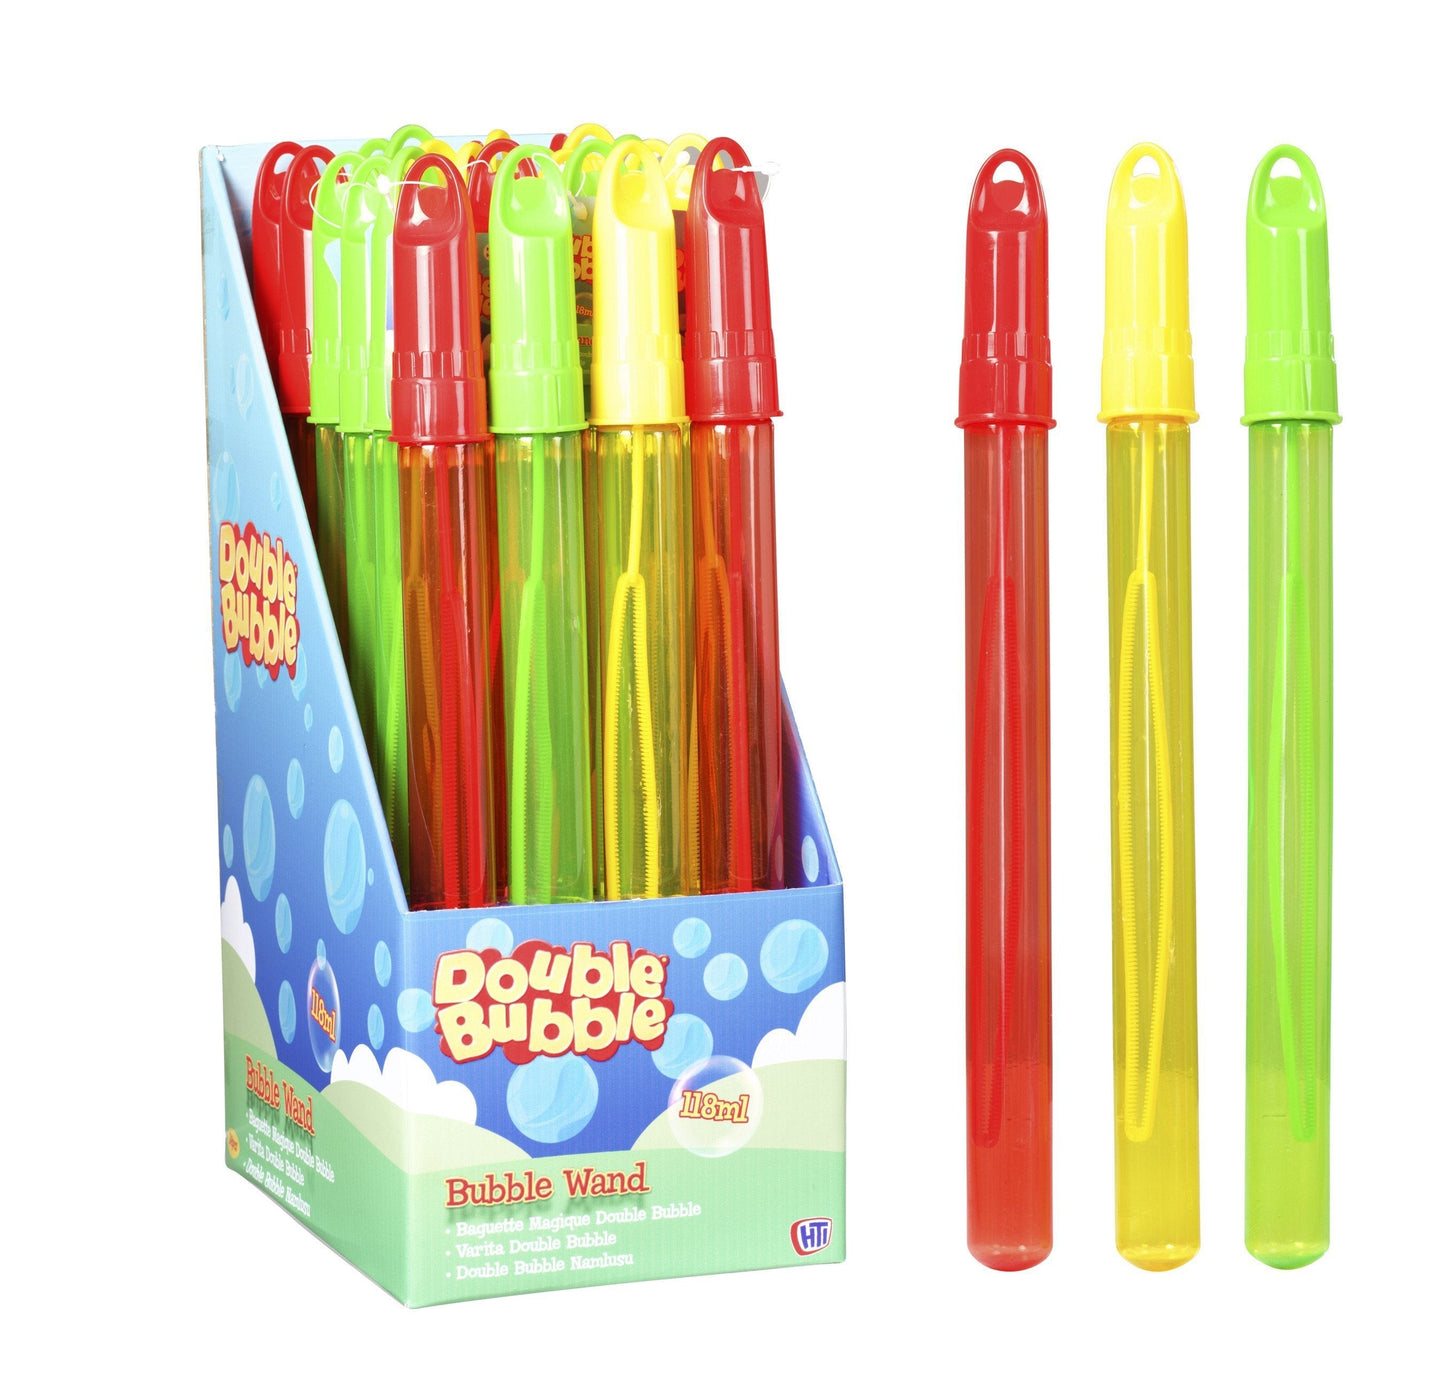 Childrens Indoor/ Outdoor Double Bubble Magic Wand 118ml 1373017/315962  (Parcel Rate)